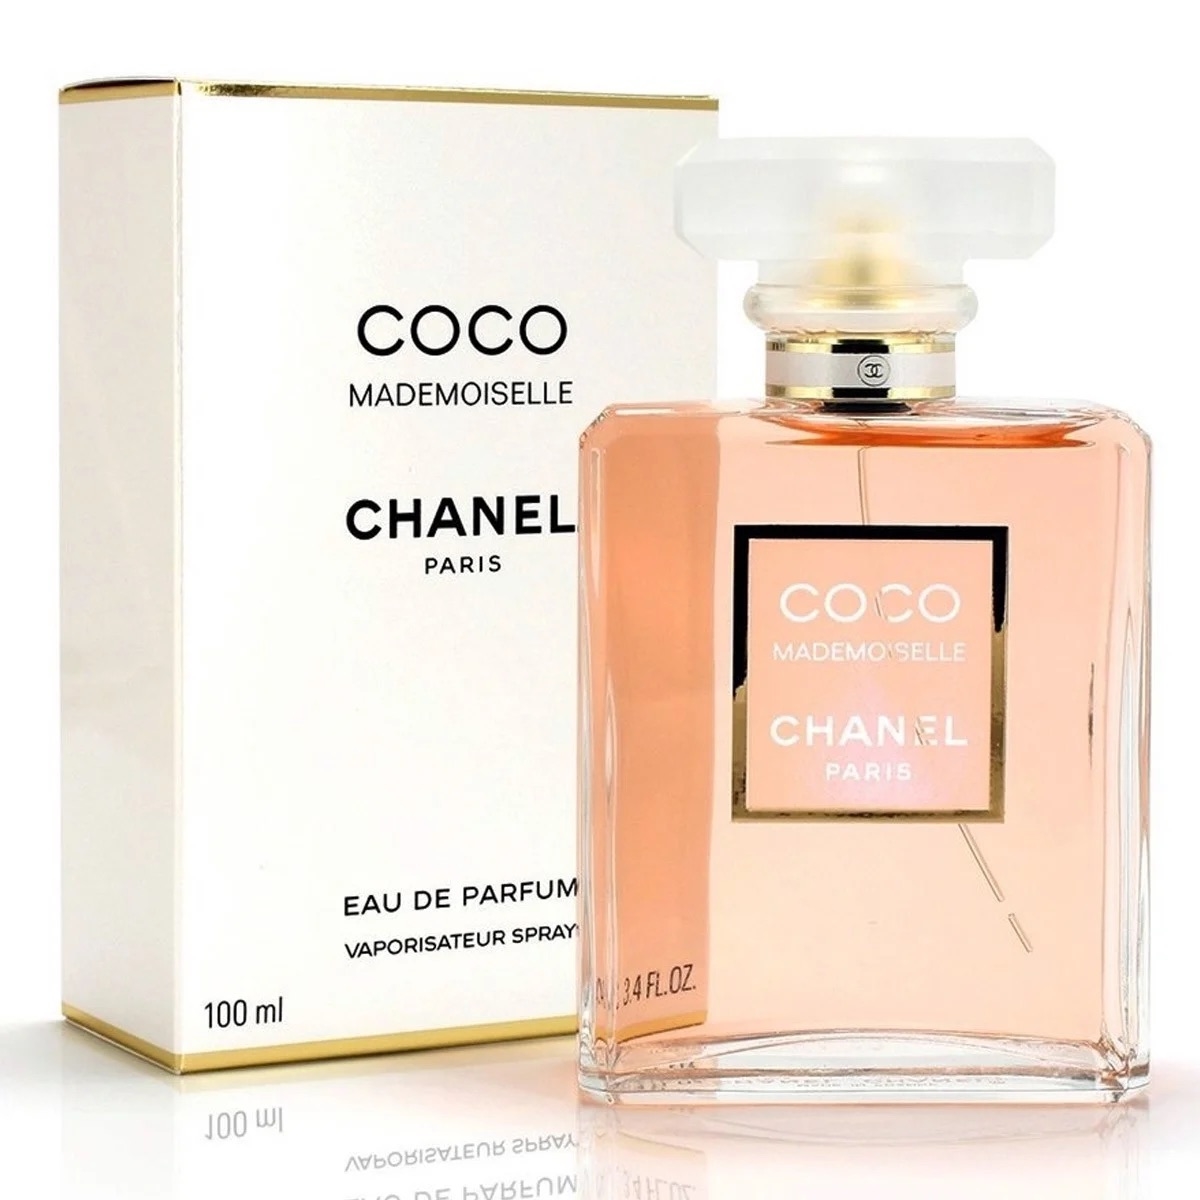 DISCOVERY SET Nữ Best Seller 1 Chanel Coco Mademoiselle Intense 2ml   Narciso For Her EDP 2ml  Lancome La Vie EDP 2ml  Gucci Bloom 2ml   Montblanc Signature 2ml BLANC